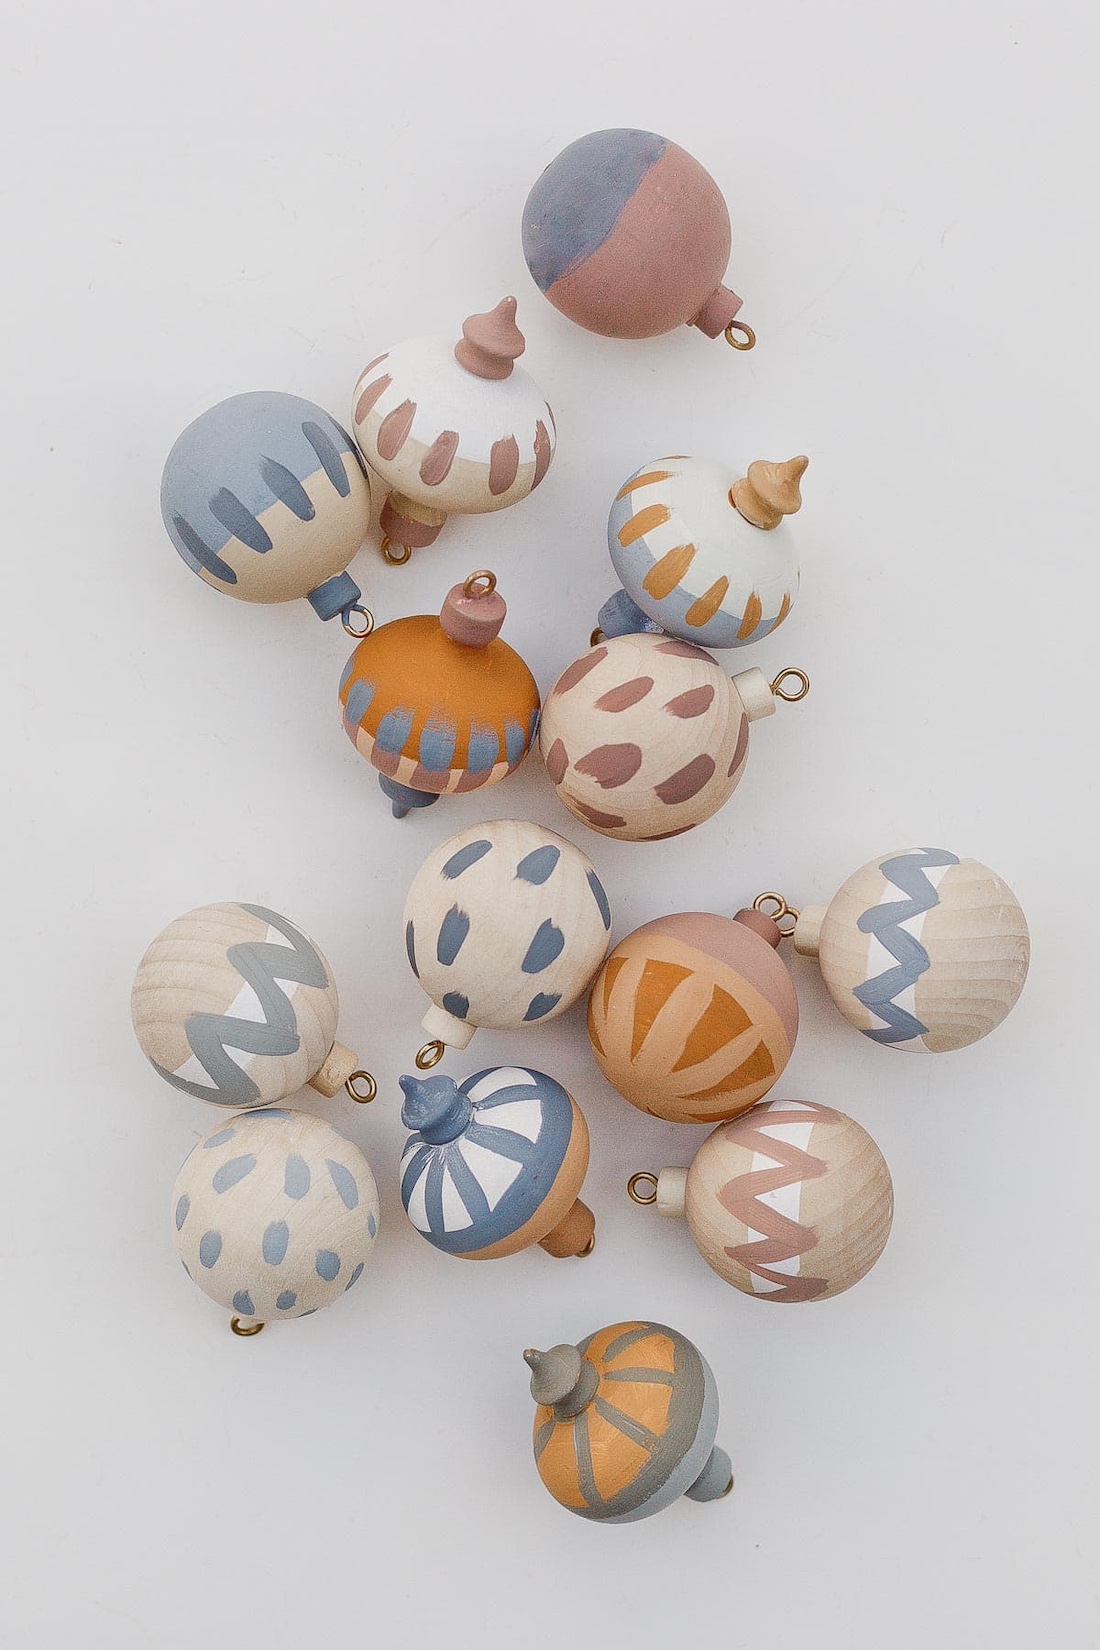 Painted wooden ornaments